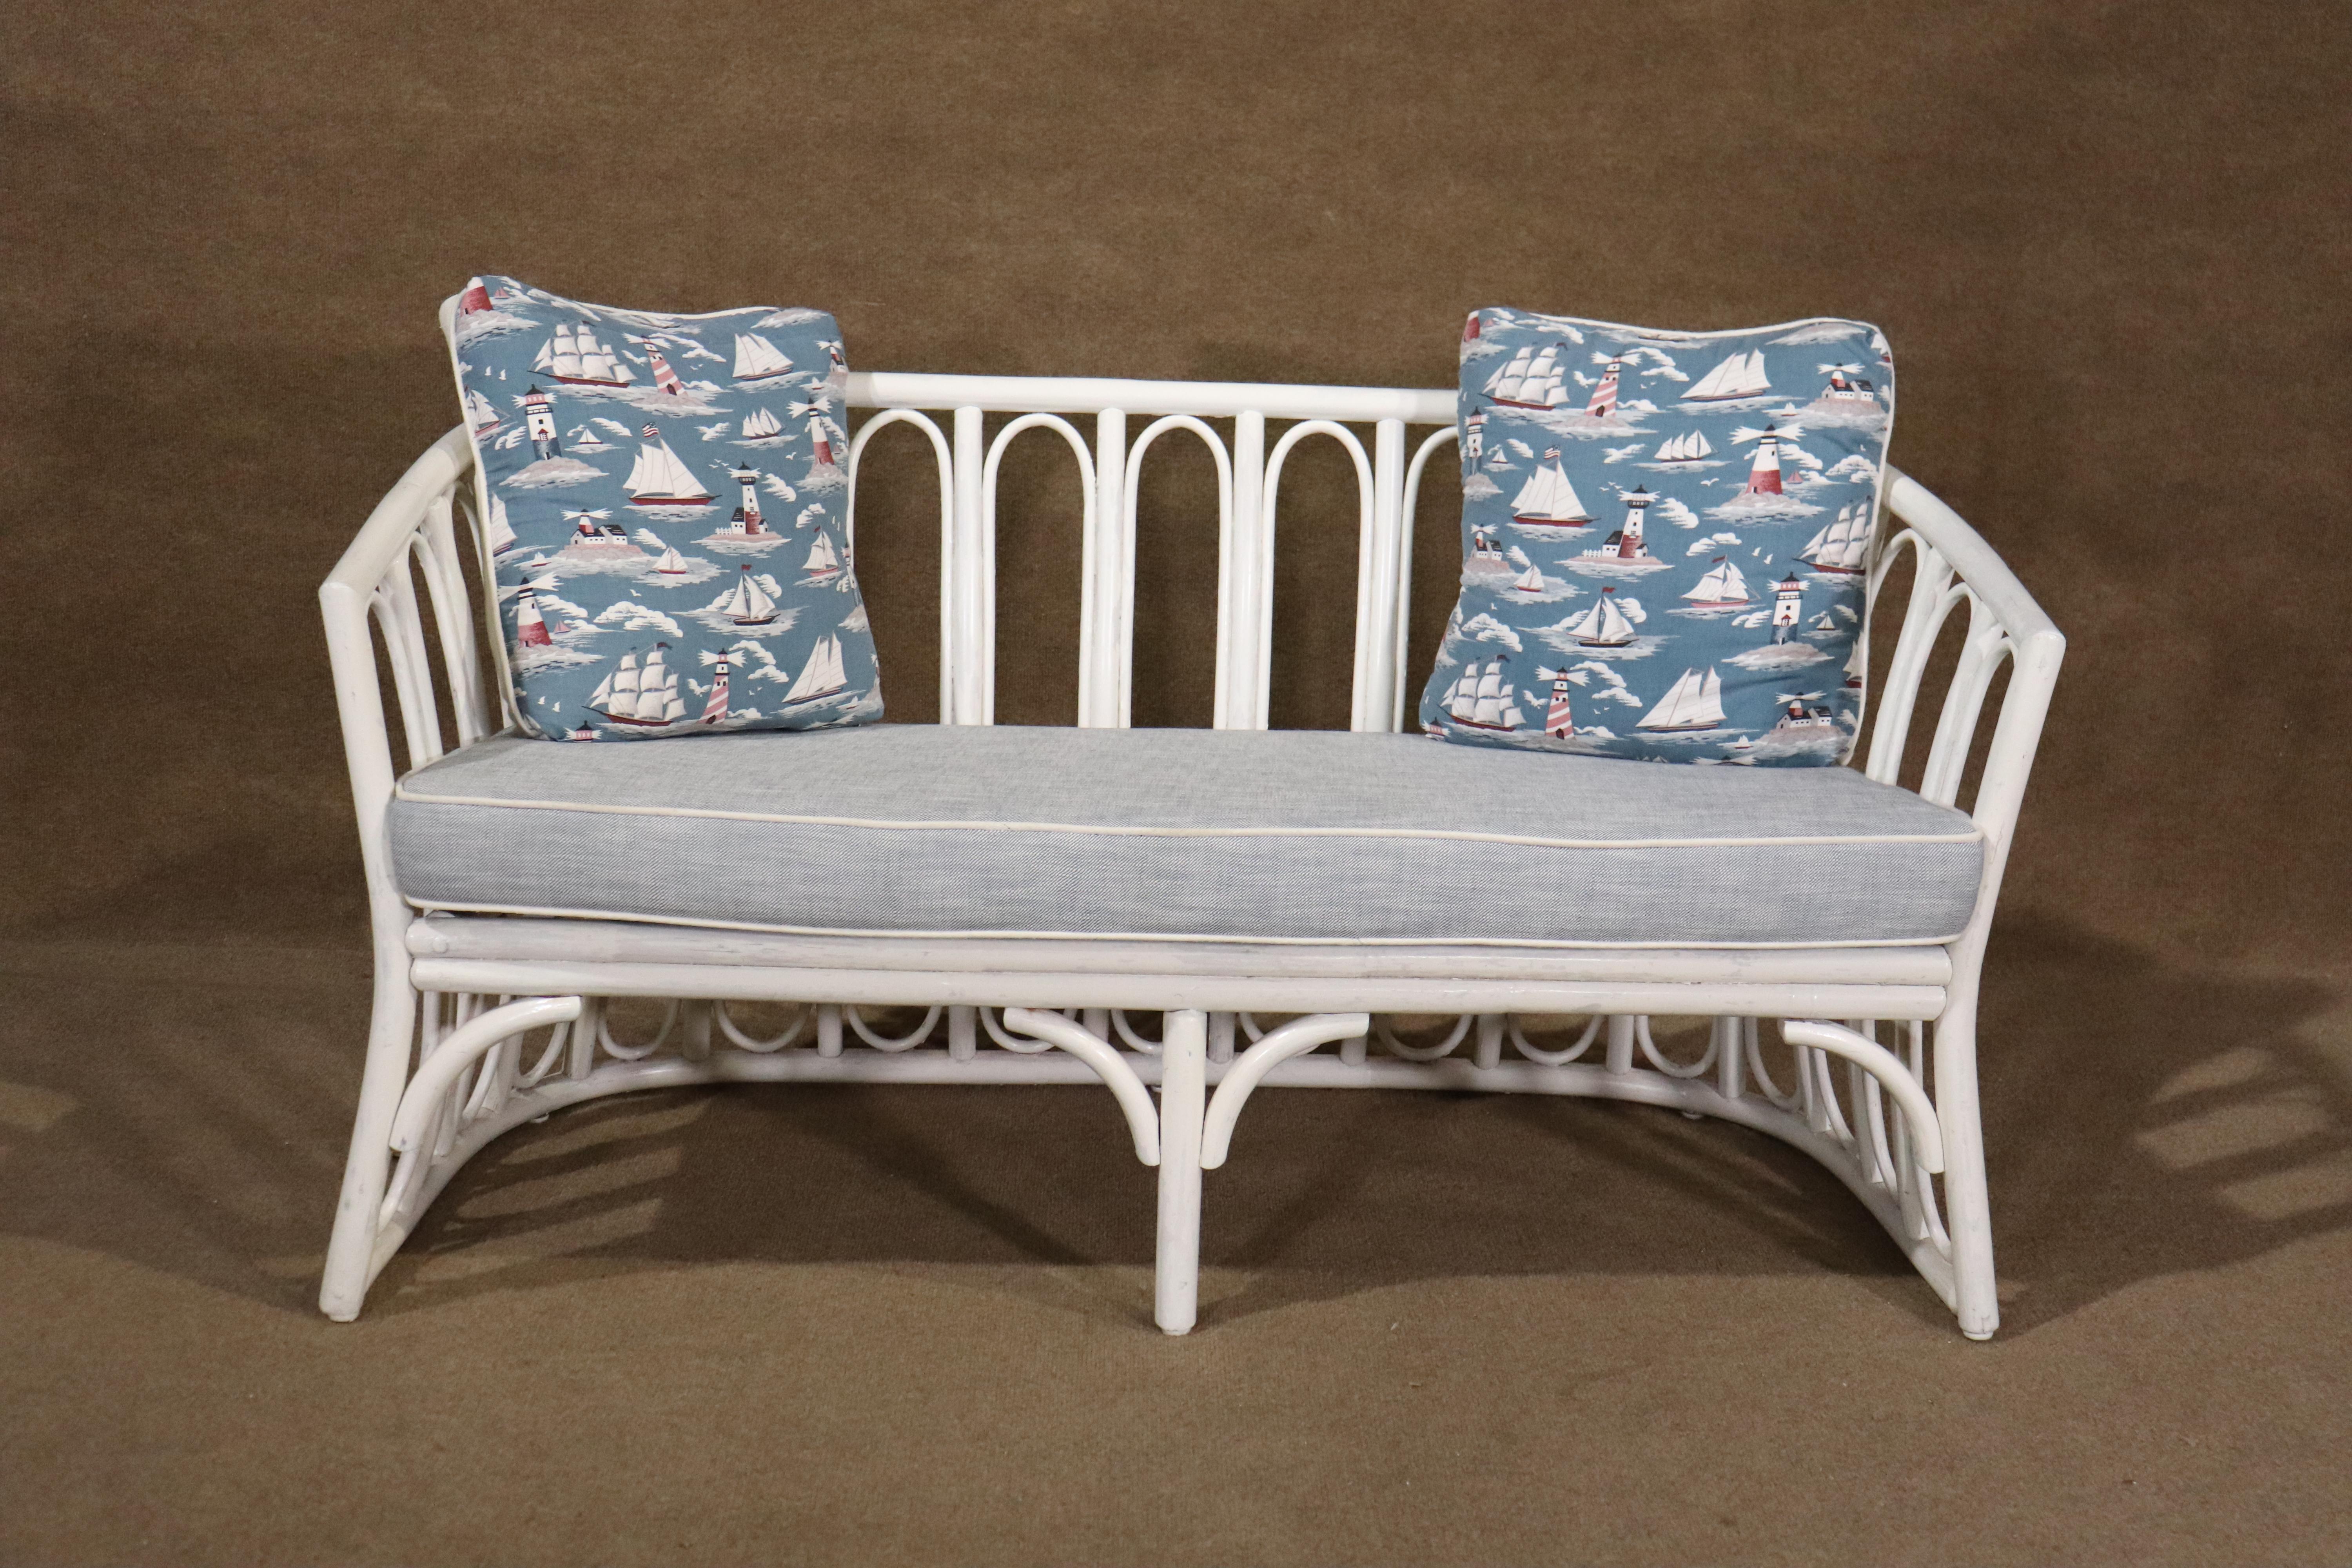 White painted rattan patio sofa set with cushions. Attractive scallop shaped backs with beach style pillows. Great for covered patio or backyard.
sofa: 28h, 53w, 27d
chairs: 28h, 25w, 26d
Please confirm location NY or NJ